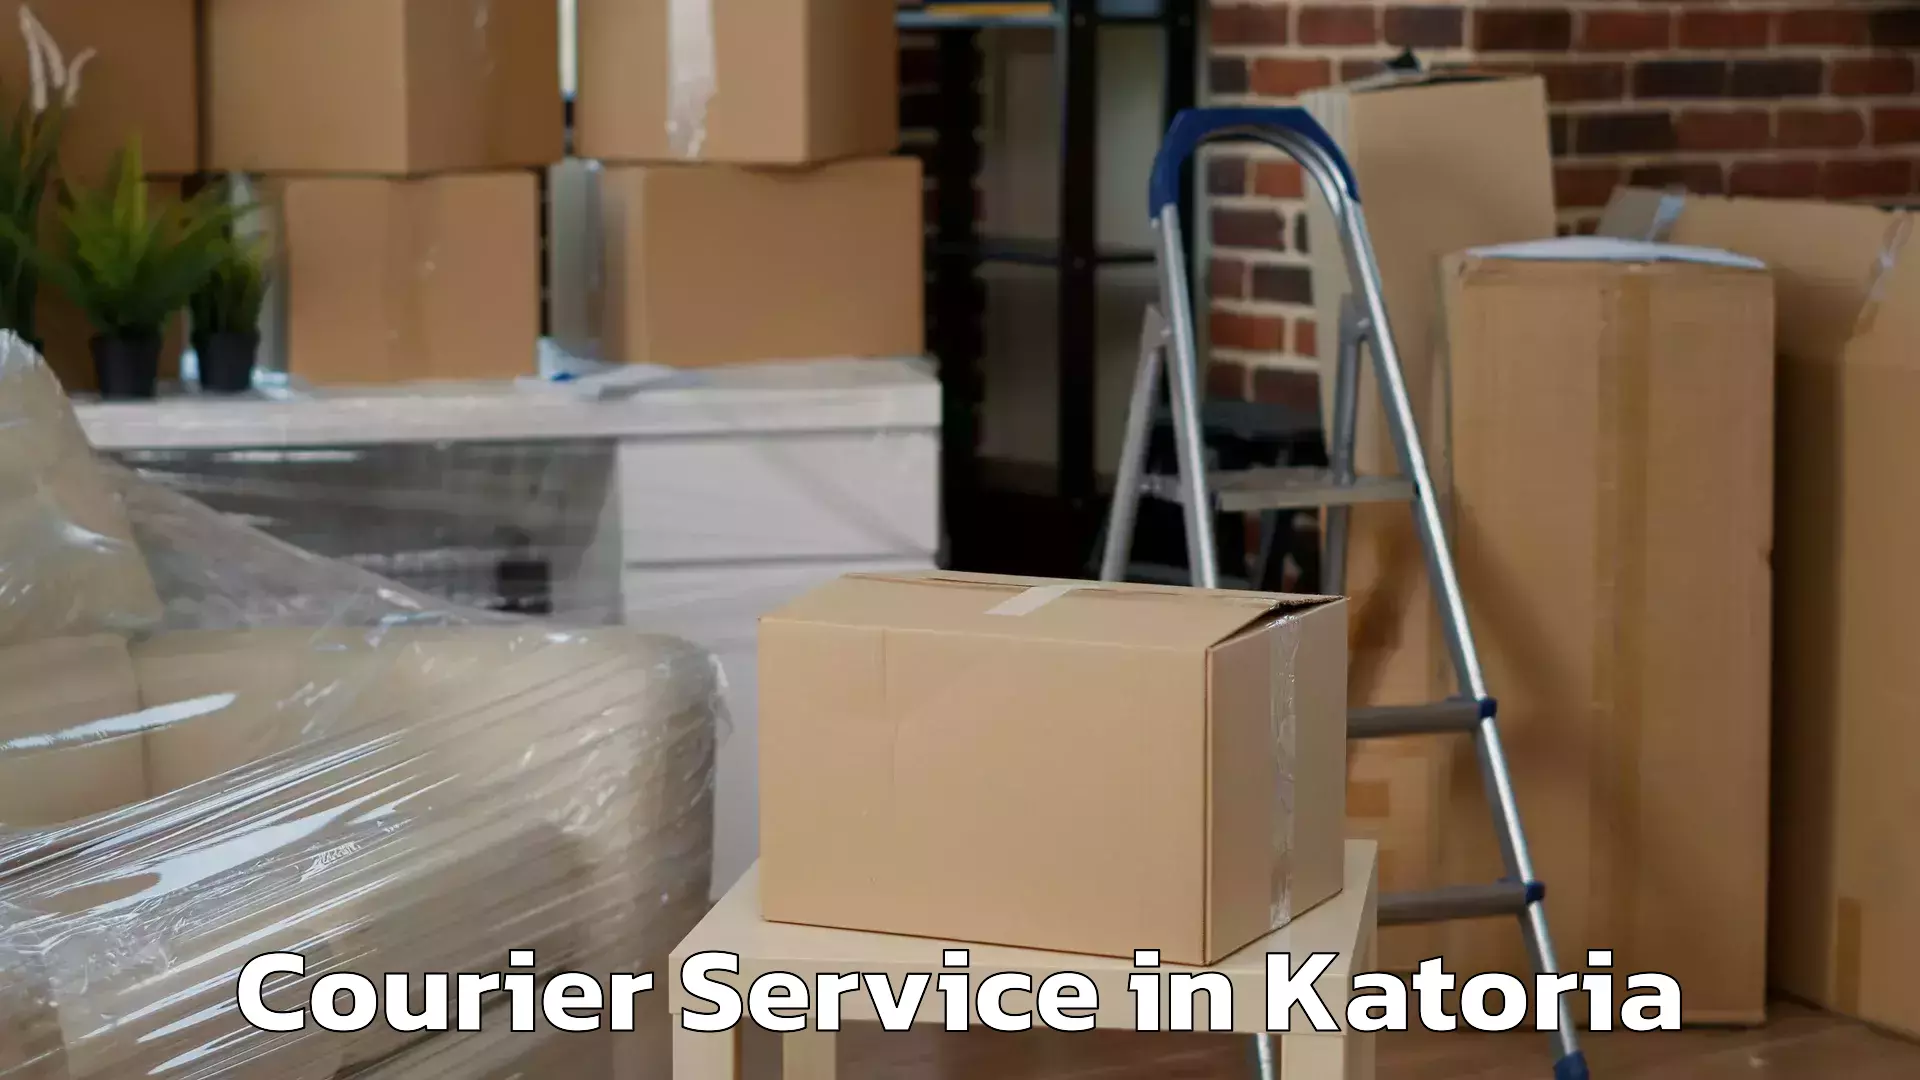 Express package services in Katoria